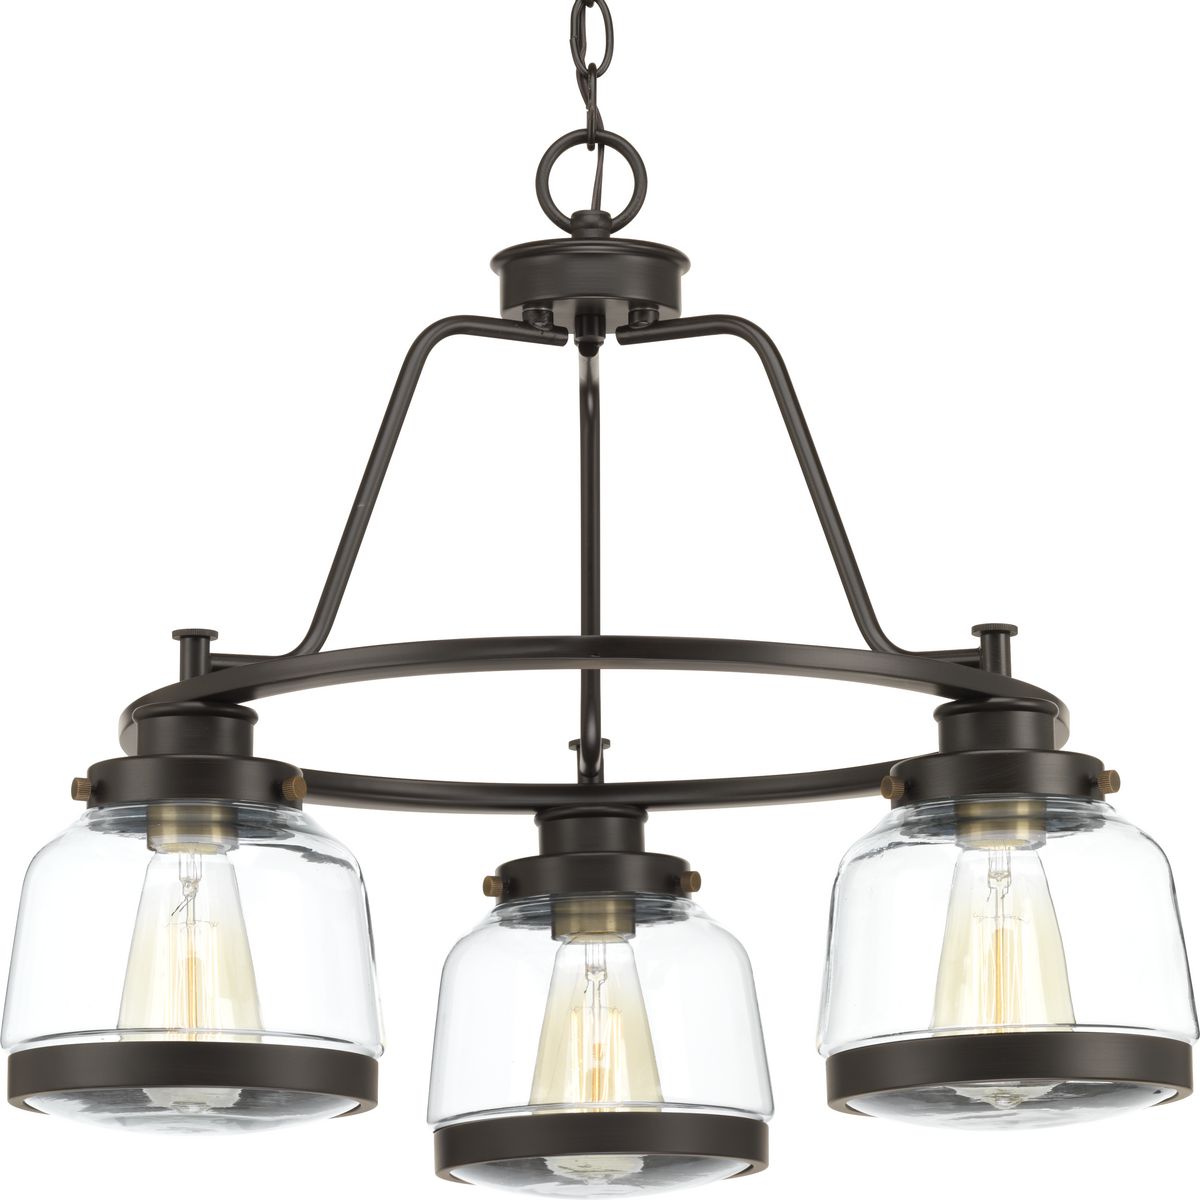 The Judson collection features a timeless clear schoolhouse-style globe. Metal fittings add distinction to complete the vintage look. Judson provides the perfect compliment to farmhouse or coastal-inspired homes. Three-light chandelier in an Antique Bronze finish.